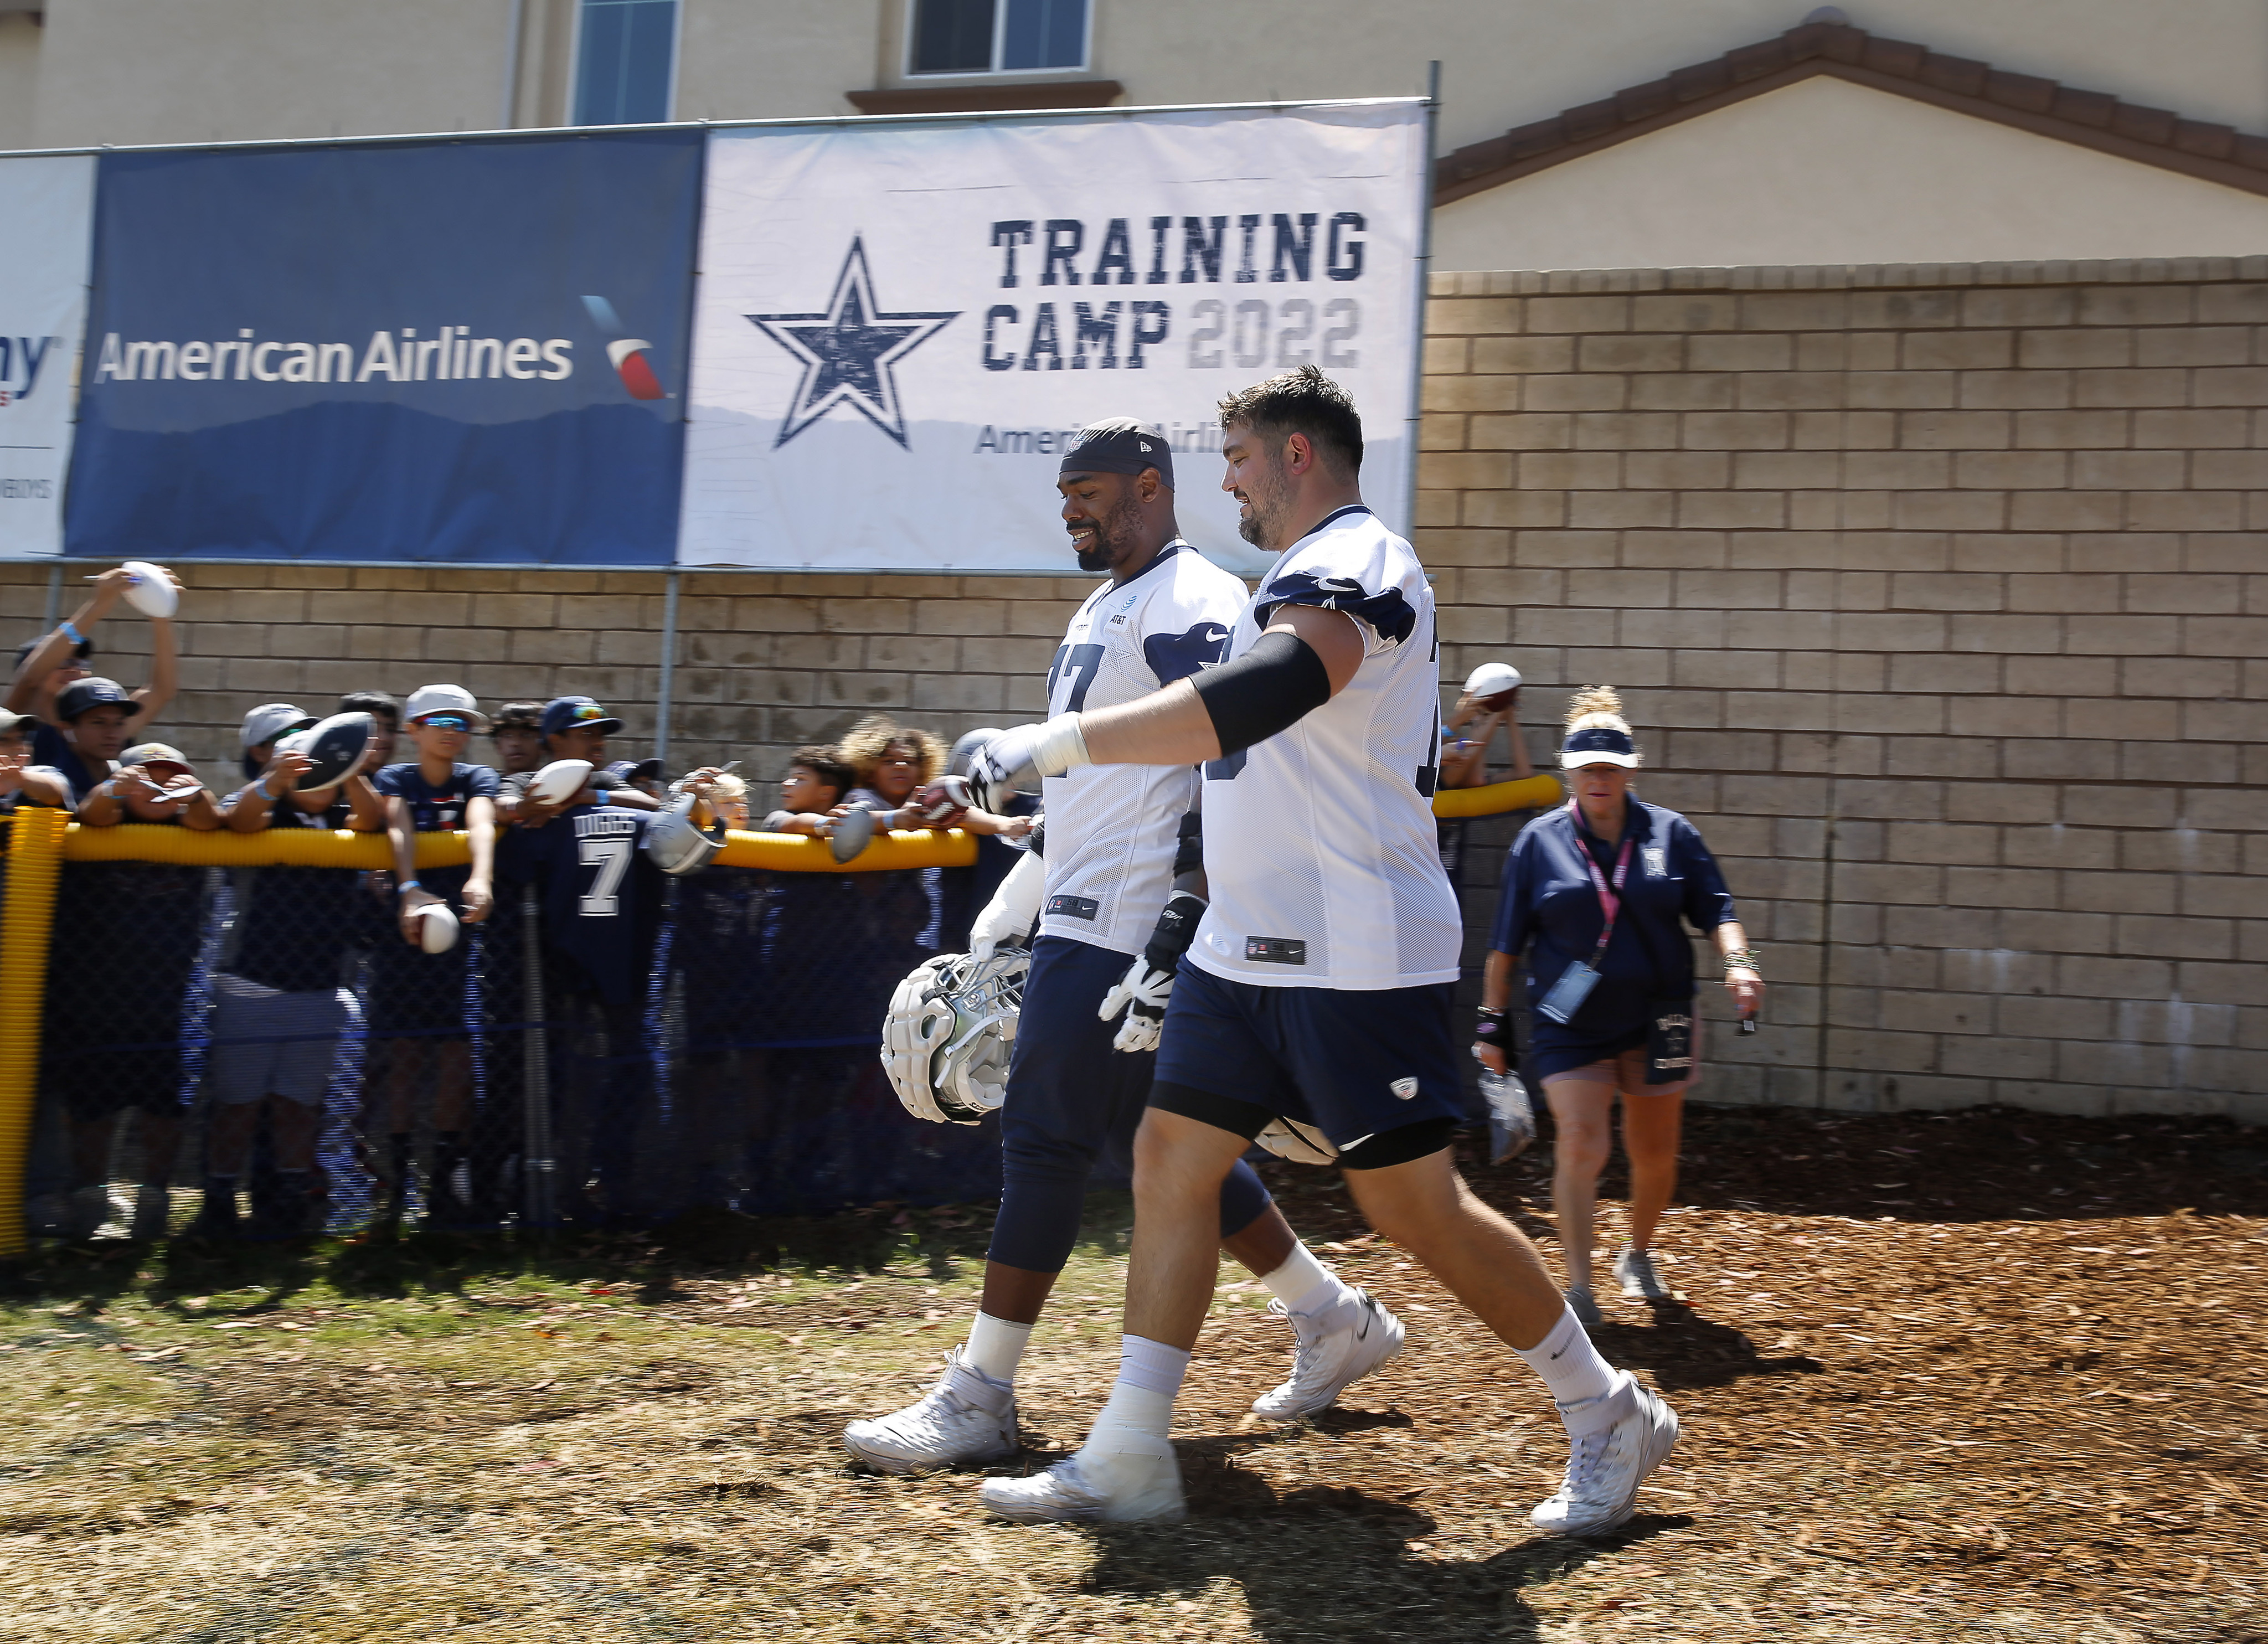 Zack Martin and Tyron Smith aren't focusing on Hall of Fame trajectory just yet